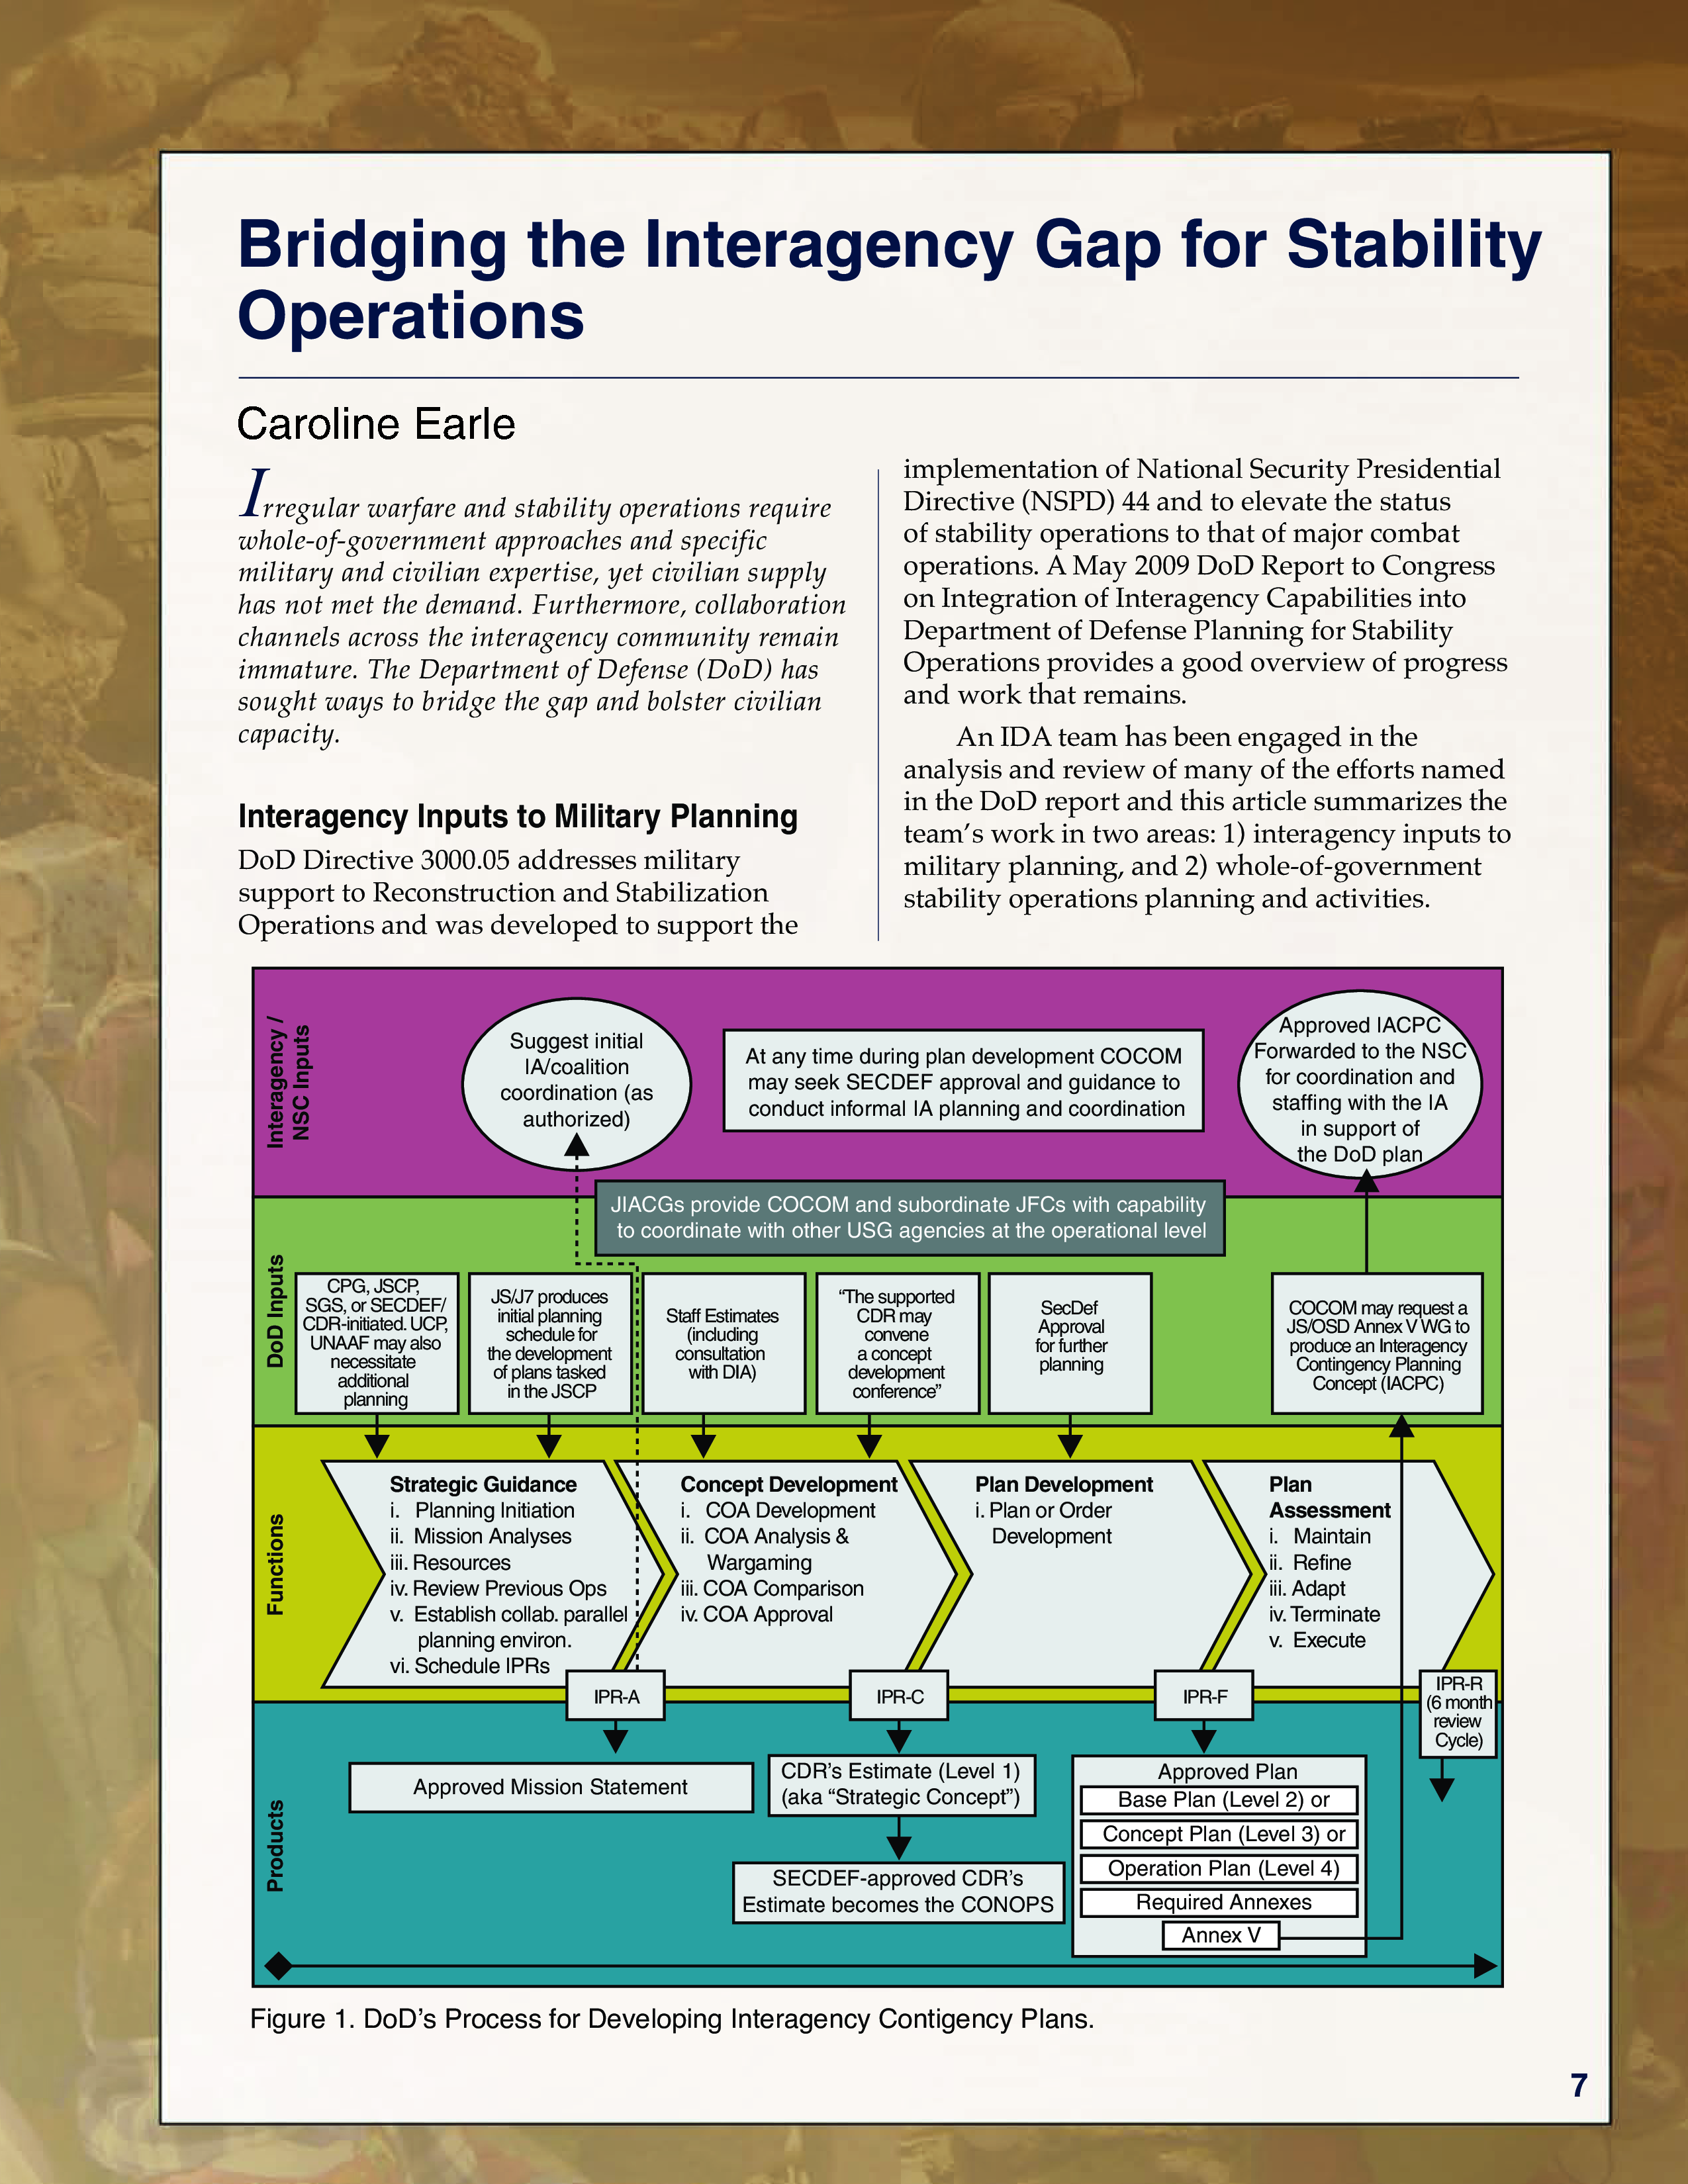 Bridging the Interagency Gap for Stability Operations